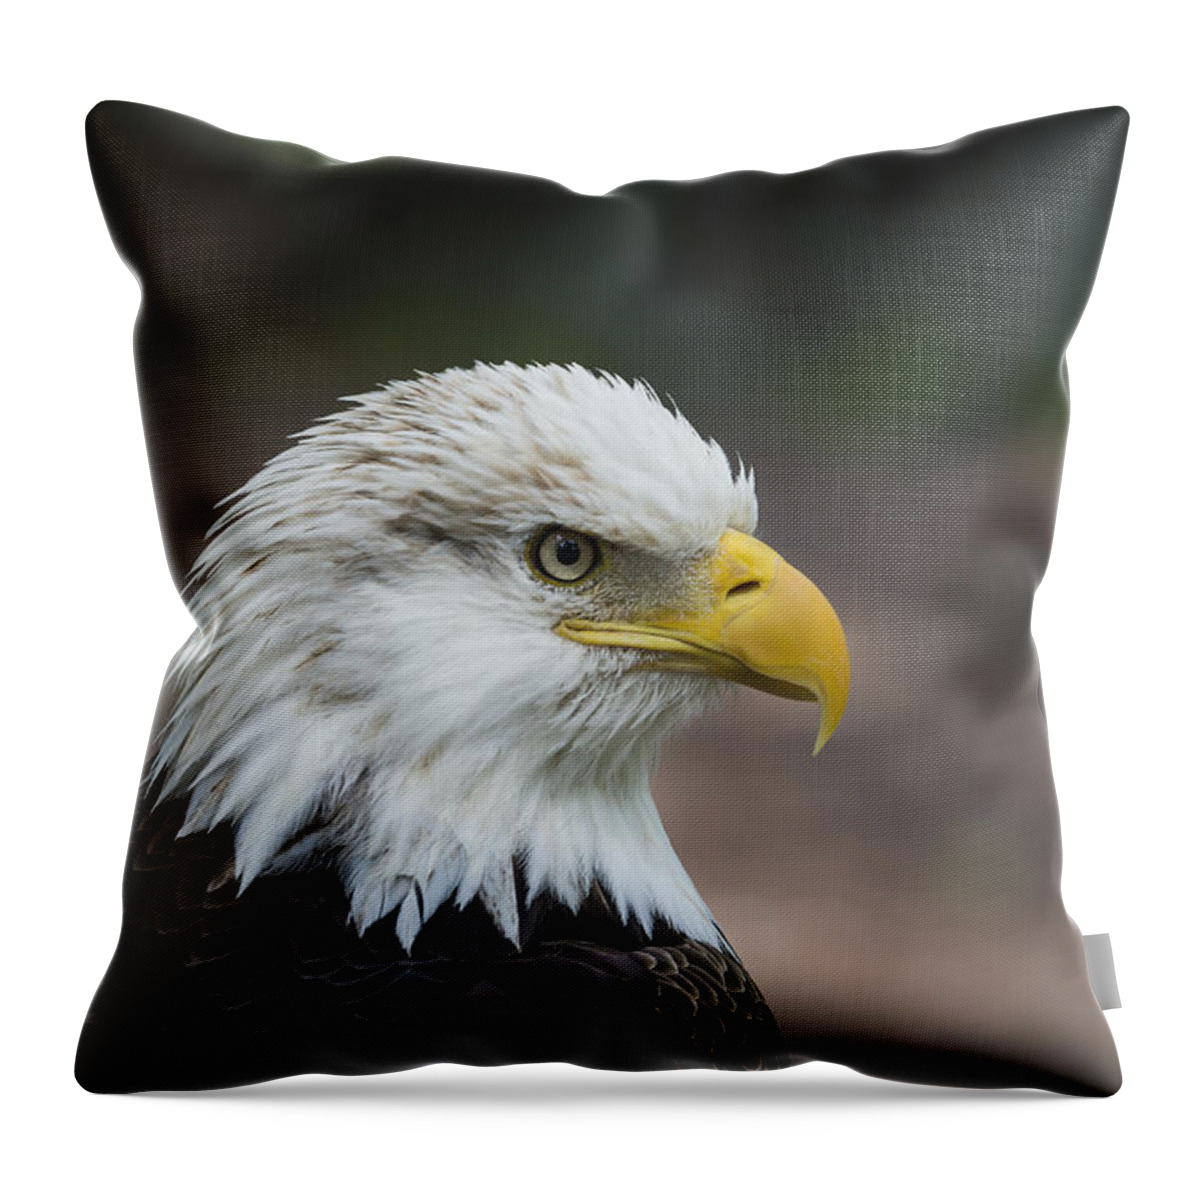 Animal Throw Pillow featuring the photograph Bald Eagle Profile by Andrea Silies